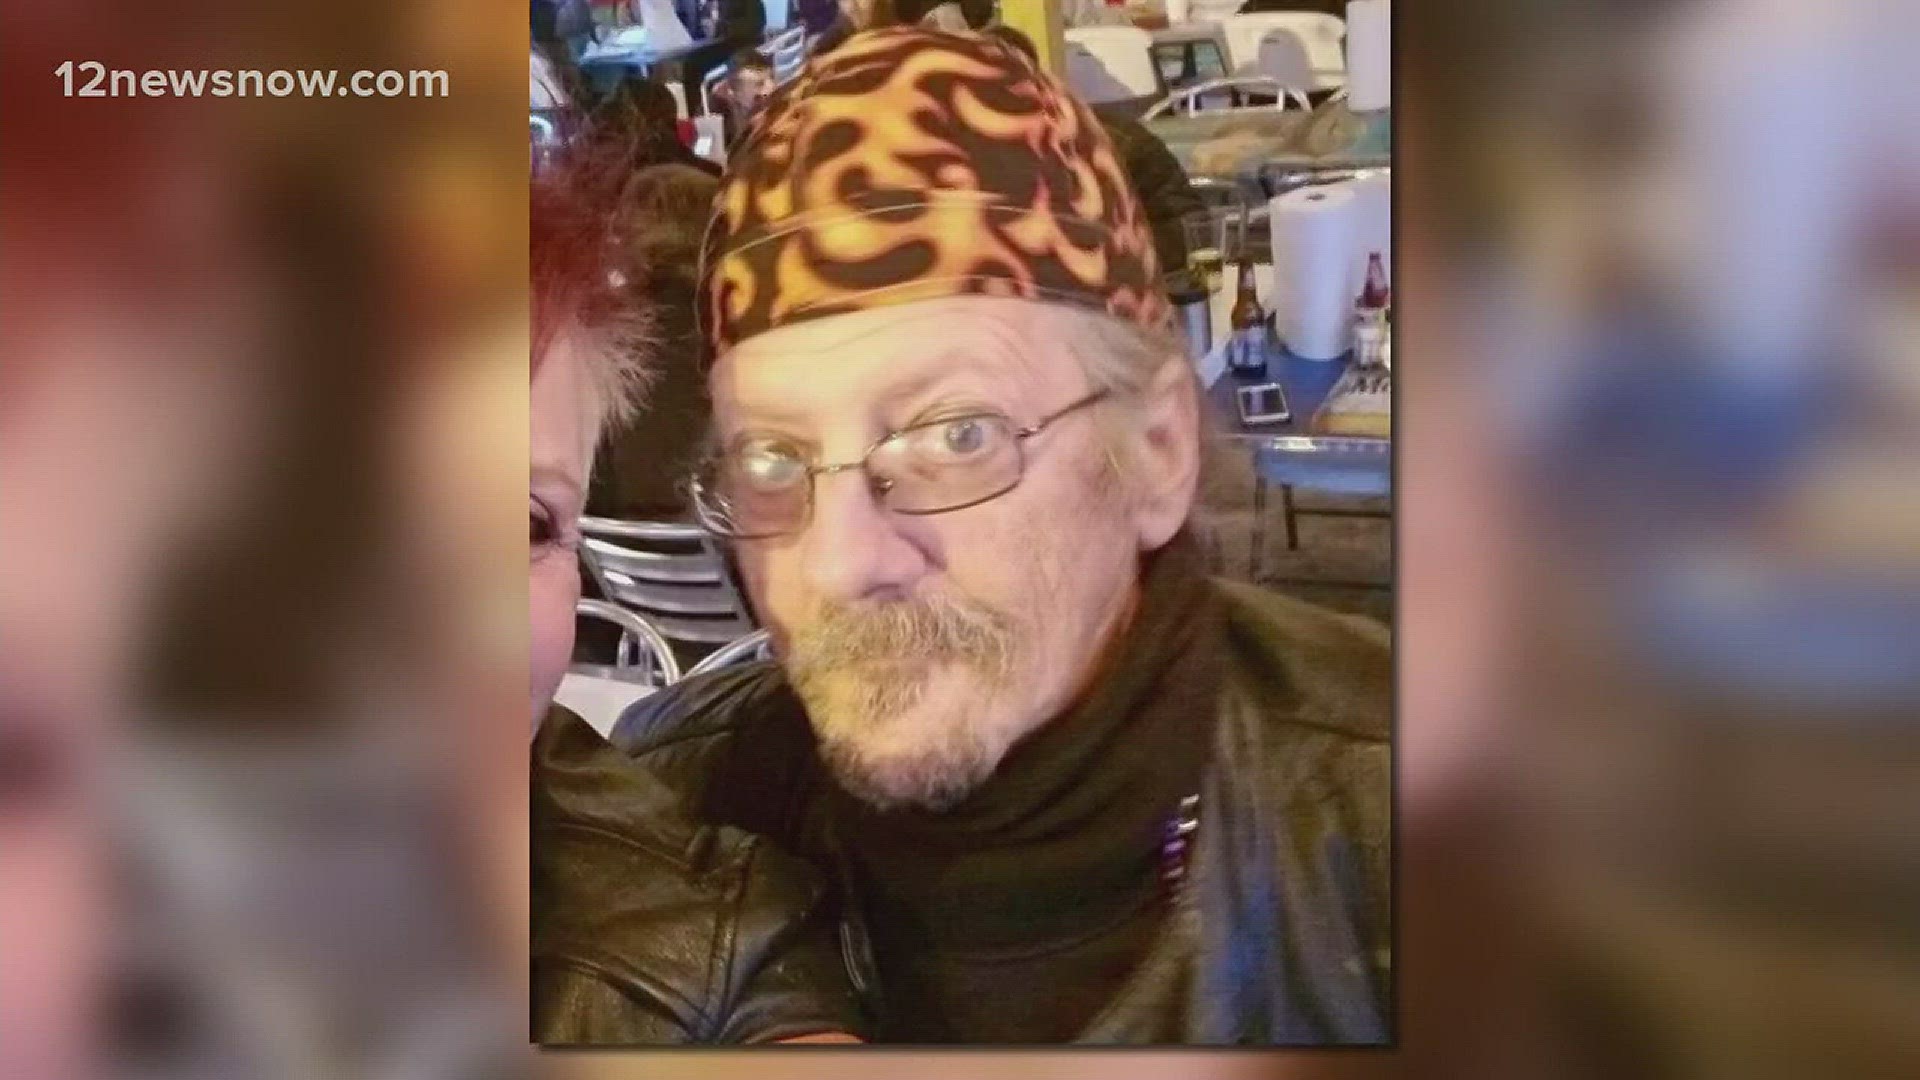 Friends mourn loss of Patrick Carter, a man killed in a motorcycle accident on Wednesday night